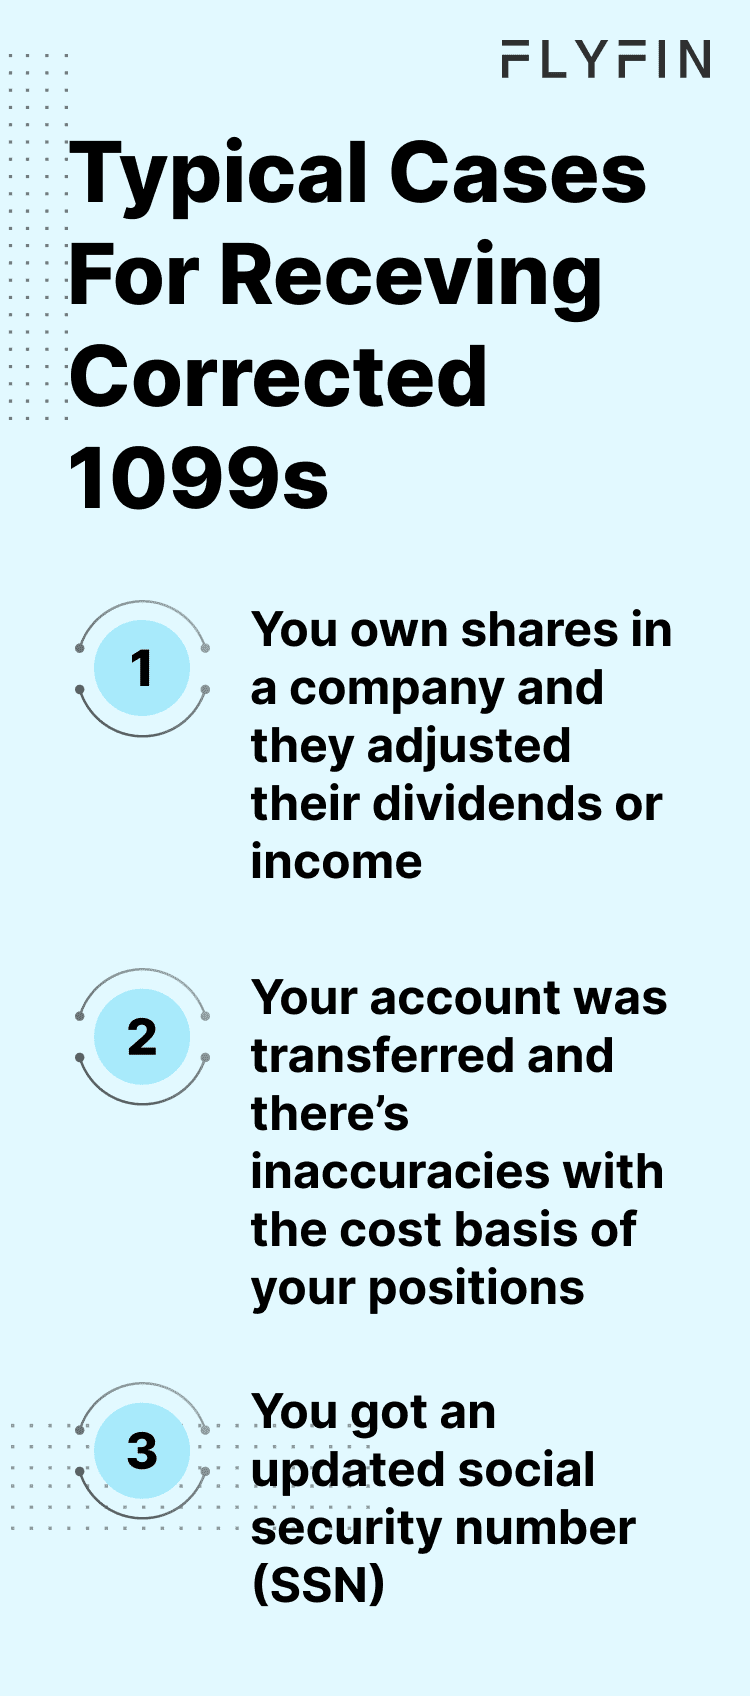 Infographic entitled Typical Cases For Receiving Corrected 1099s describing three situations where you could receive a new Robinhood 1099 tax form.